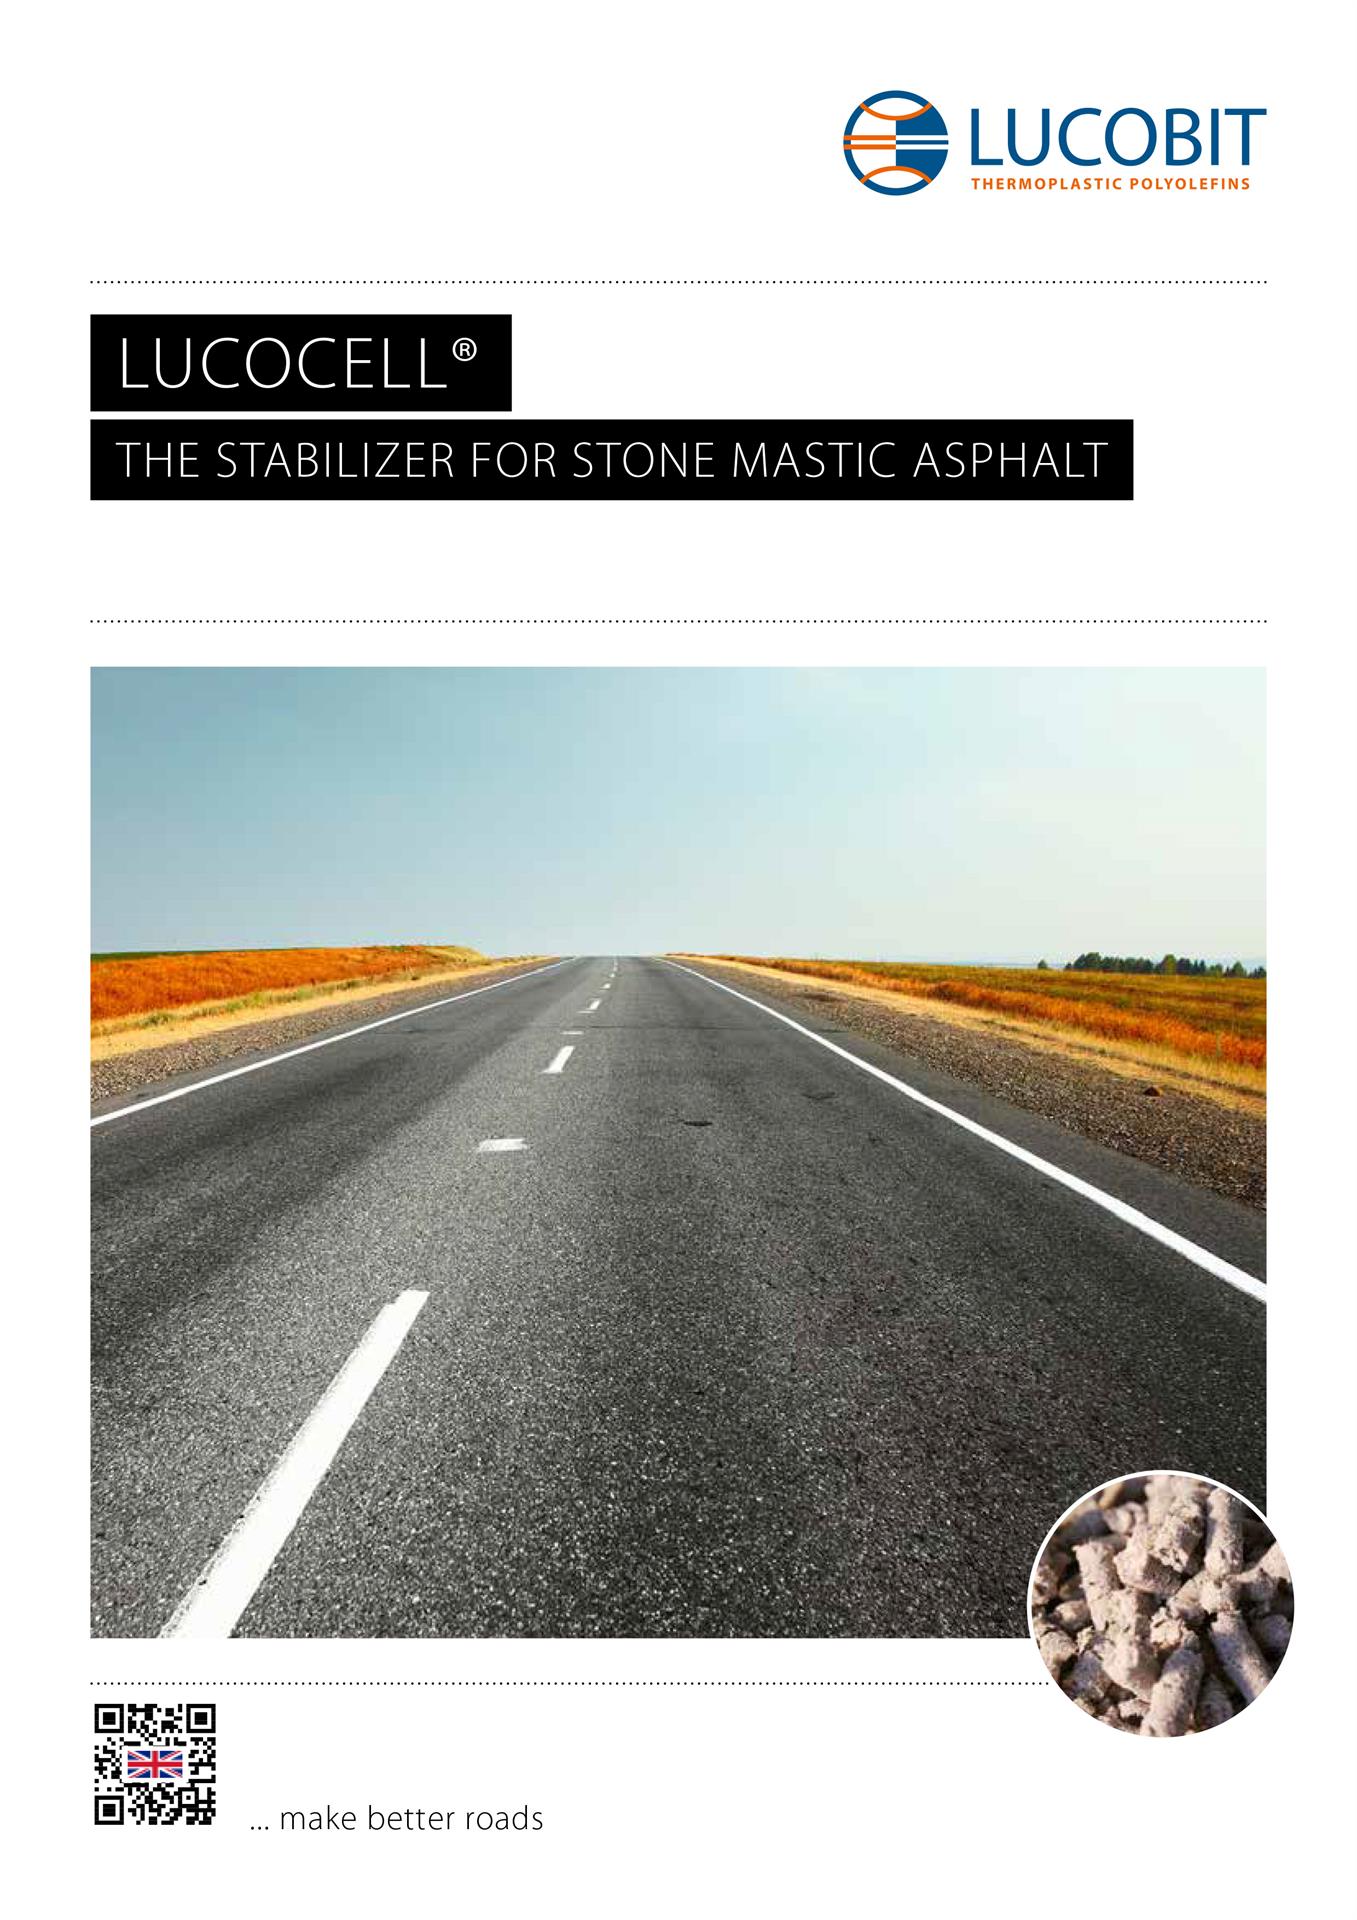 LUCOBIT Brochure - LUCOCELL THE STABILIZER FOR STONE MASTIC ASPHALT